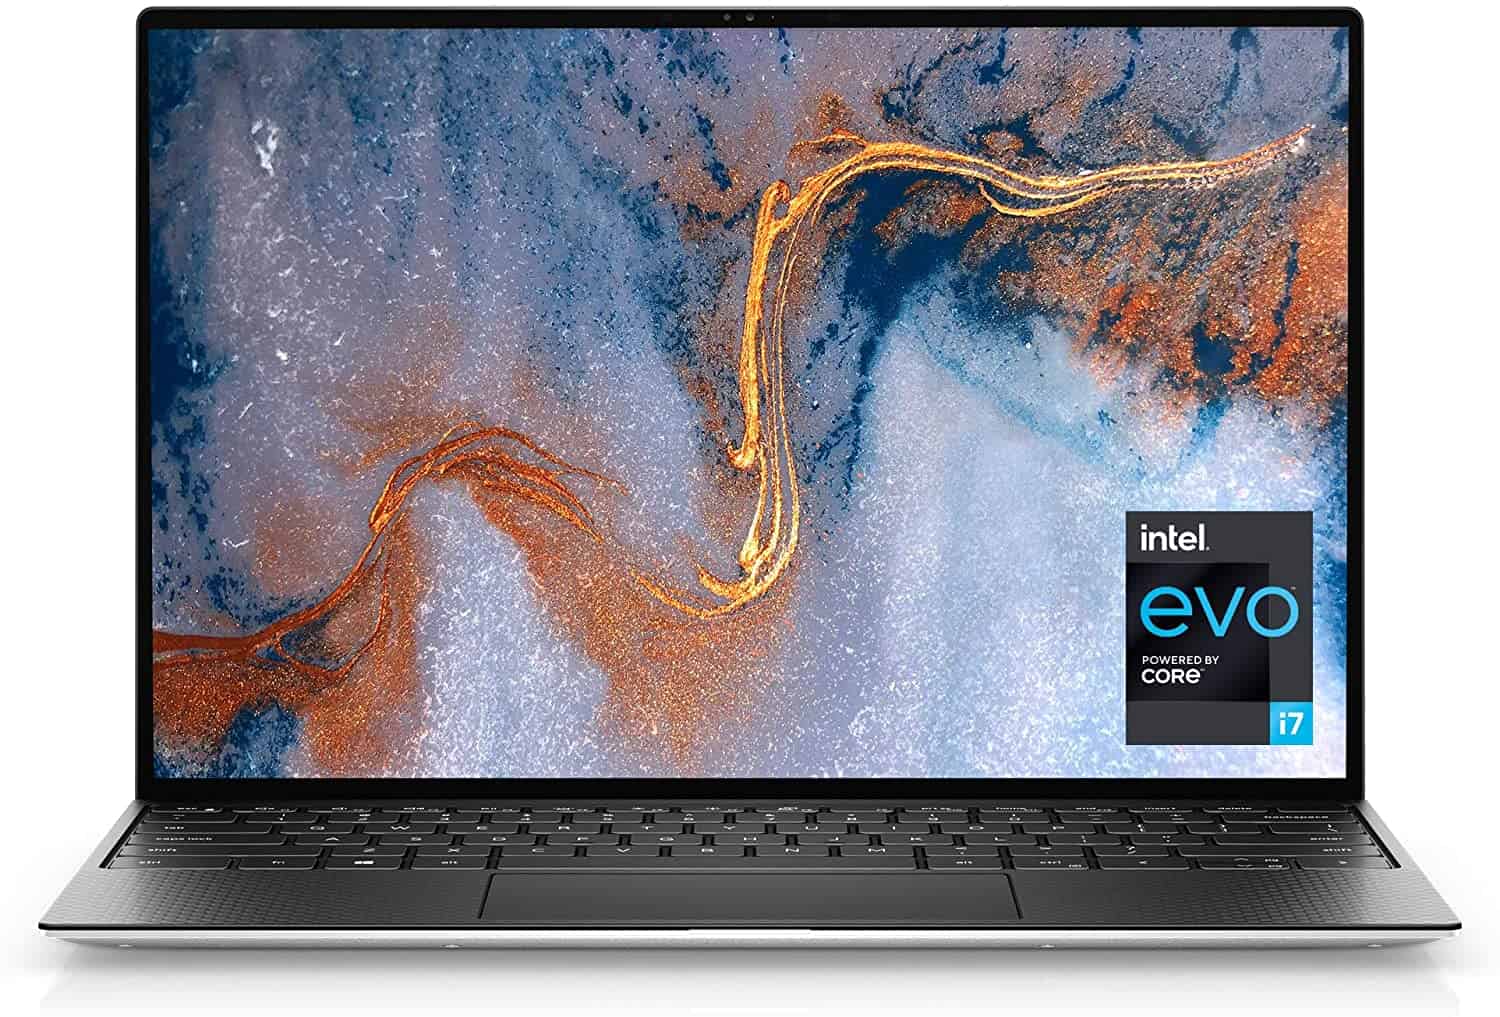 Deal Alert: Dell XPS 13(9310) laptop discounted at Amazon